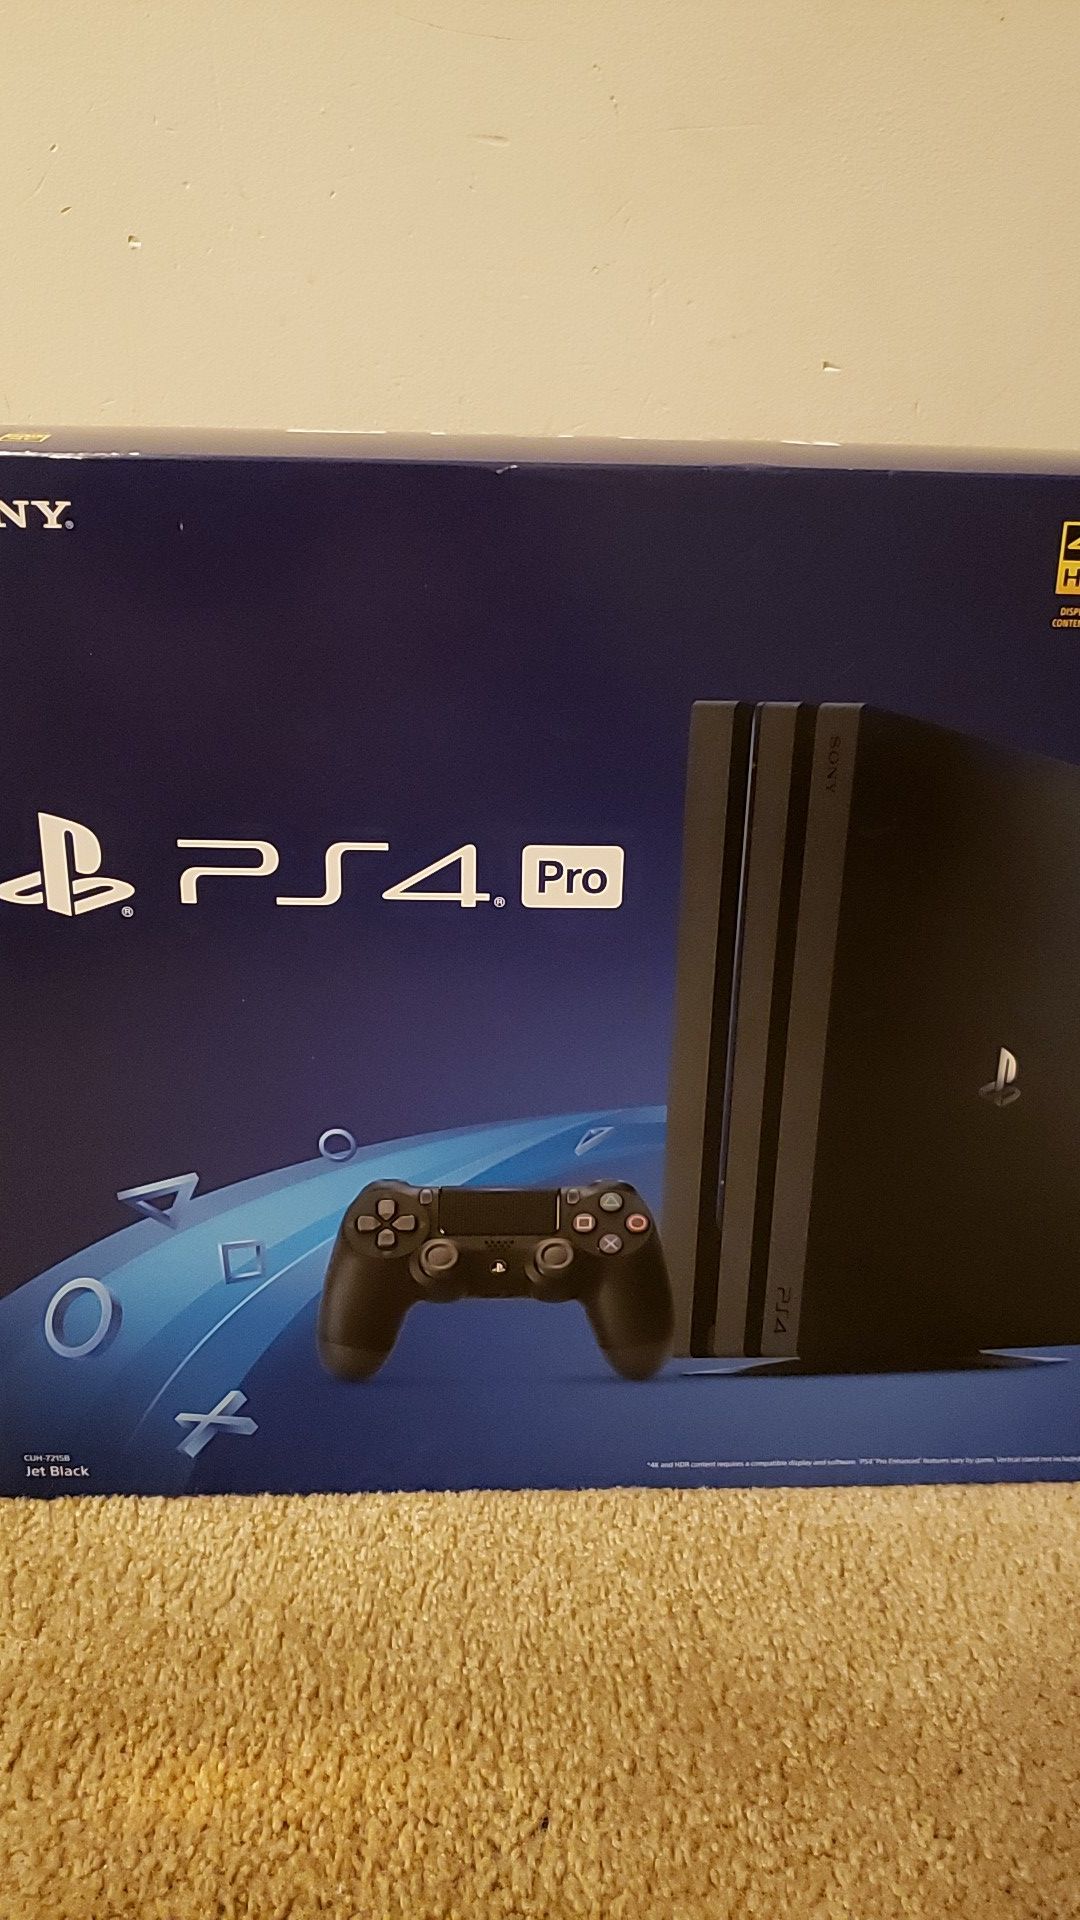 Ps4 Pro- Brand New never opened